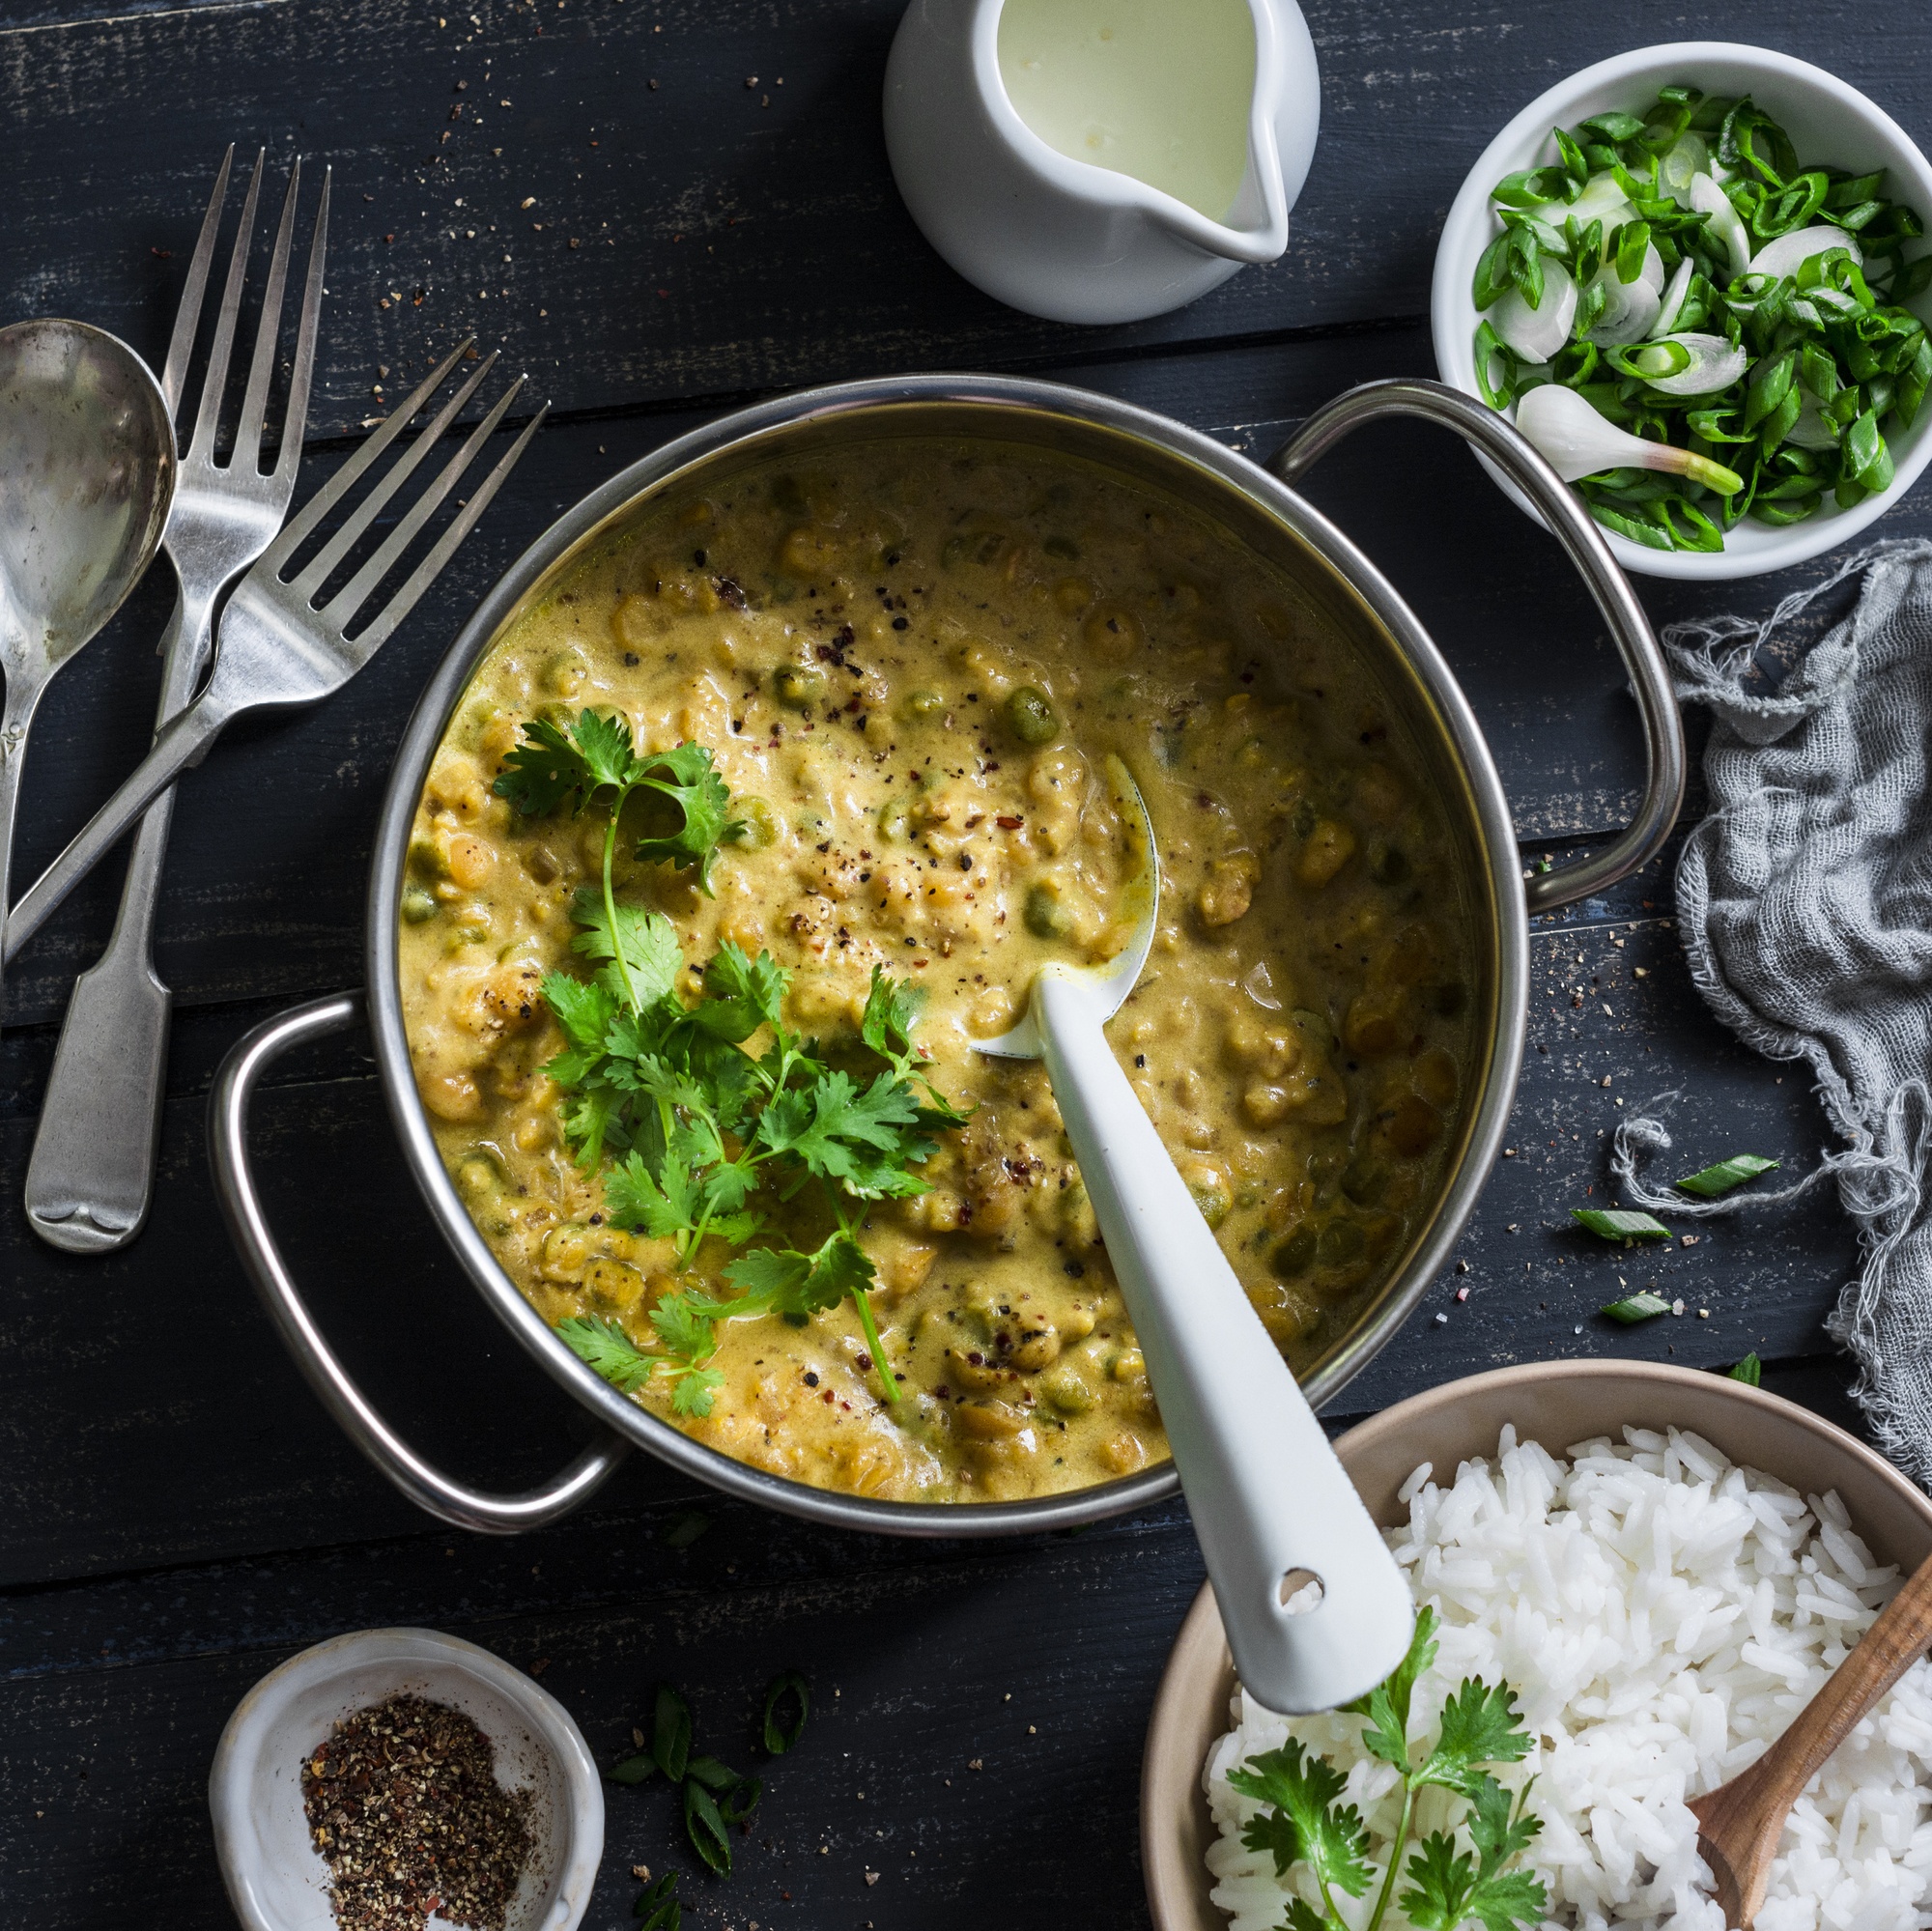 https://www.themaasclinic.com/wp-content/uploads/2020/03/Maas_Clinic_Coconut_Daal-scaled.jpg